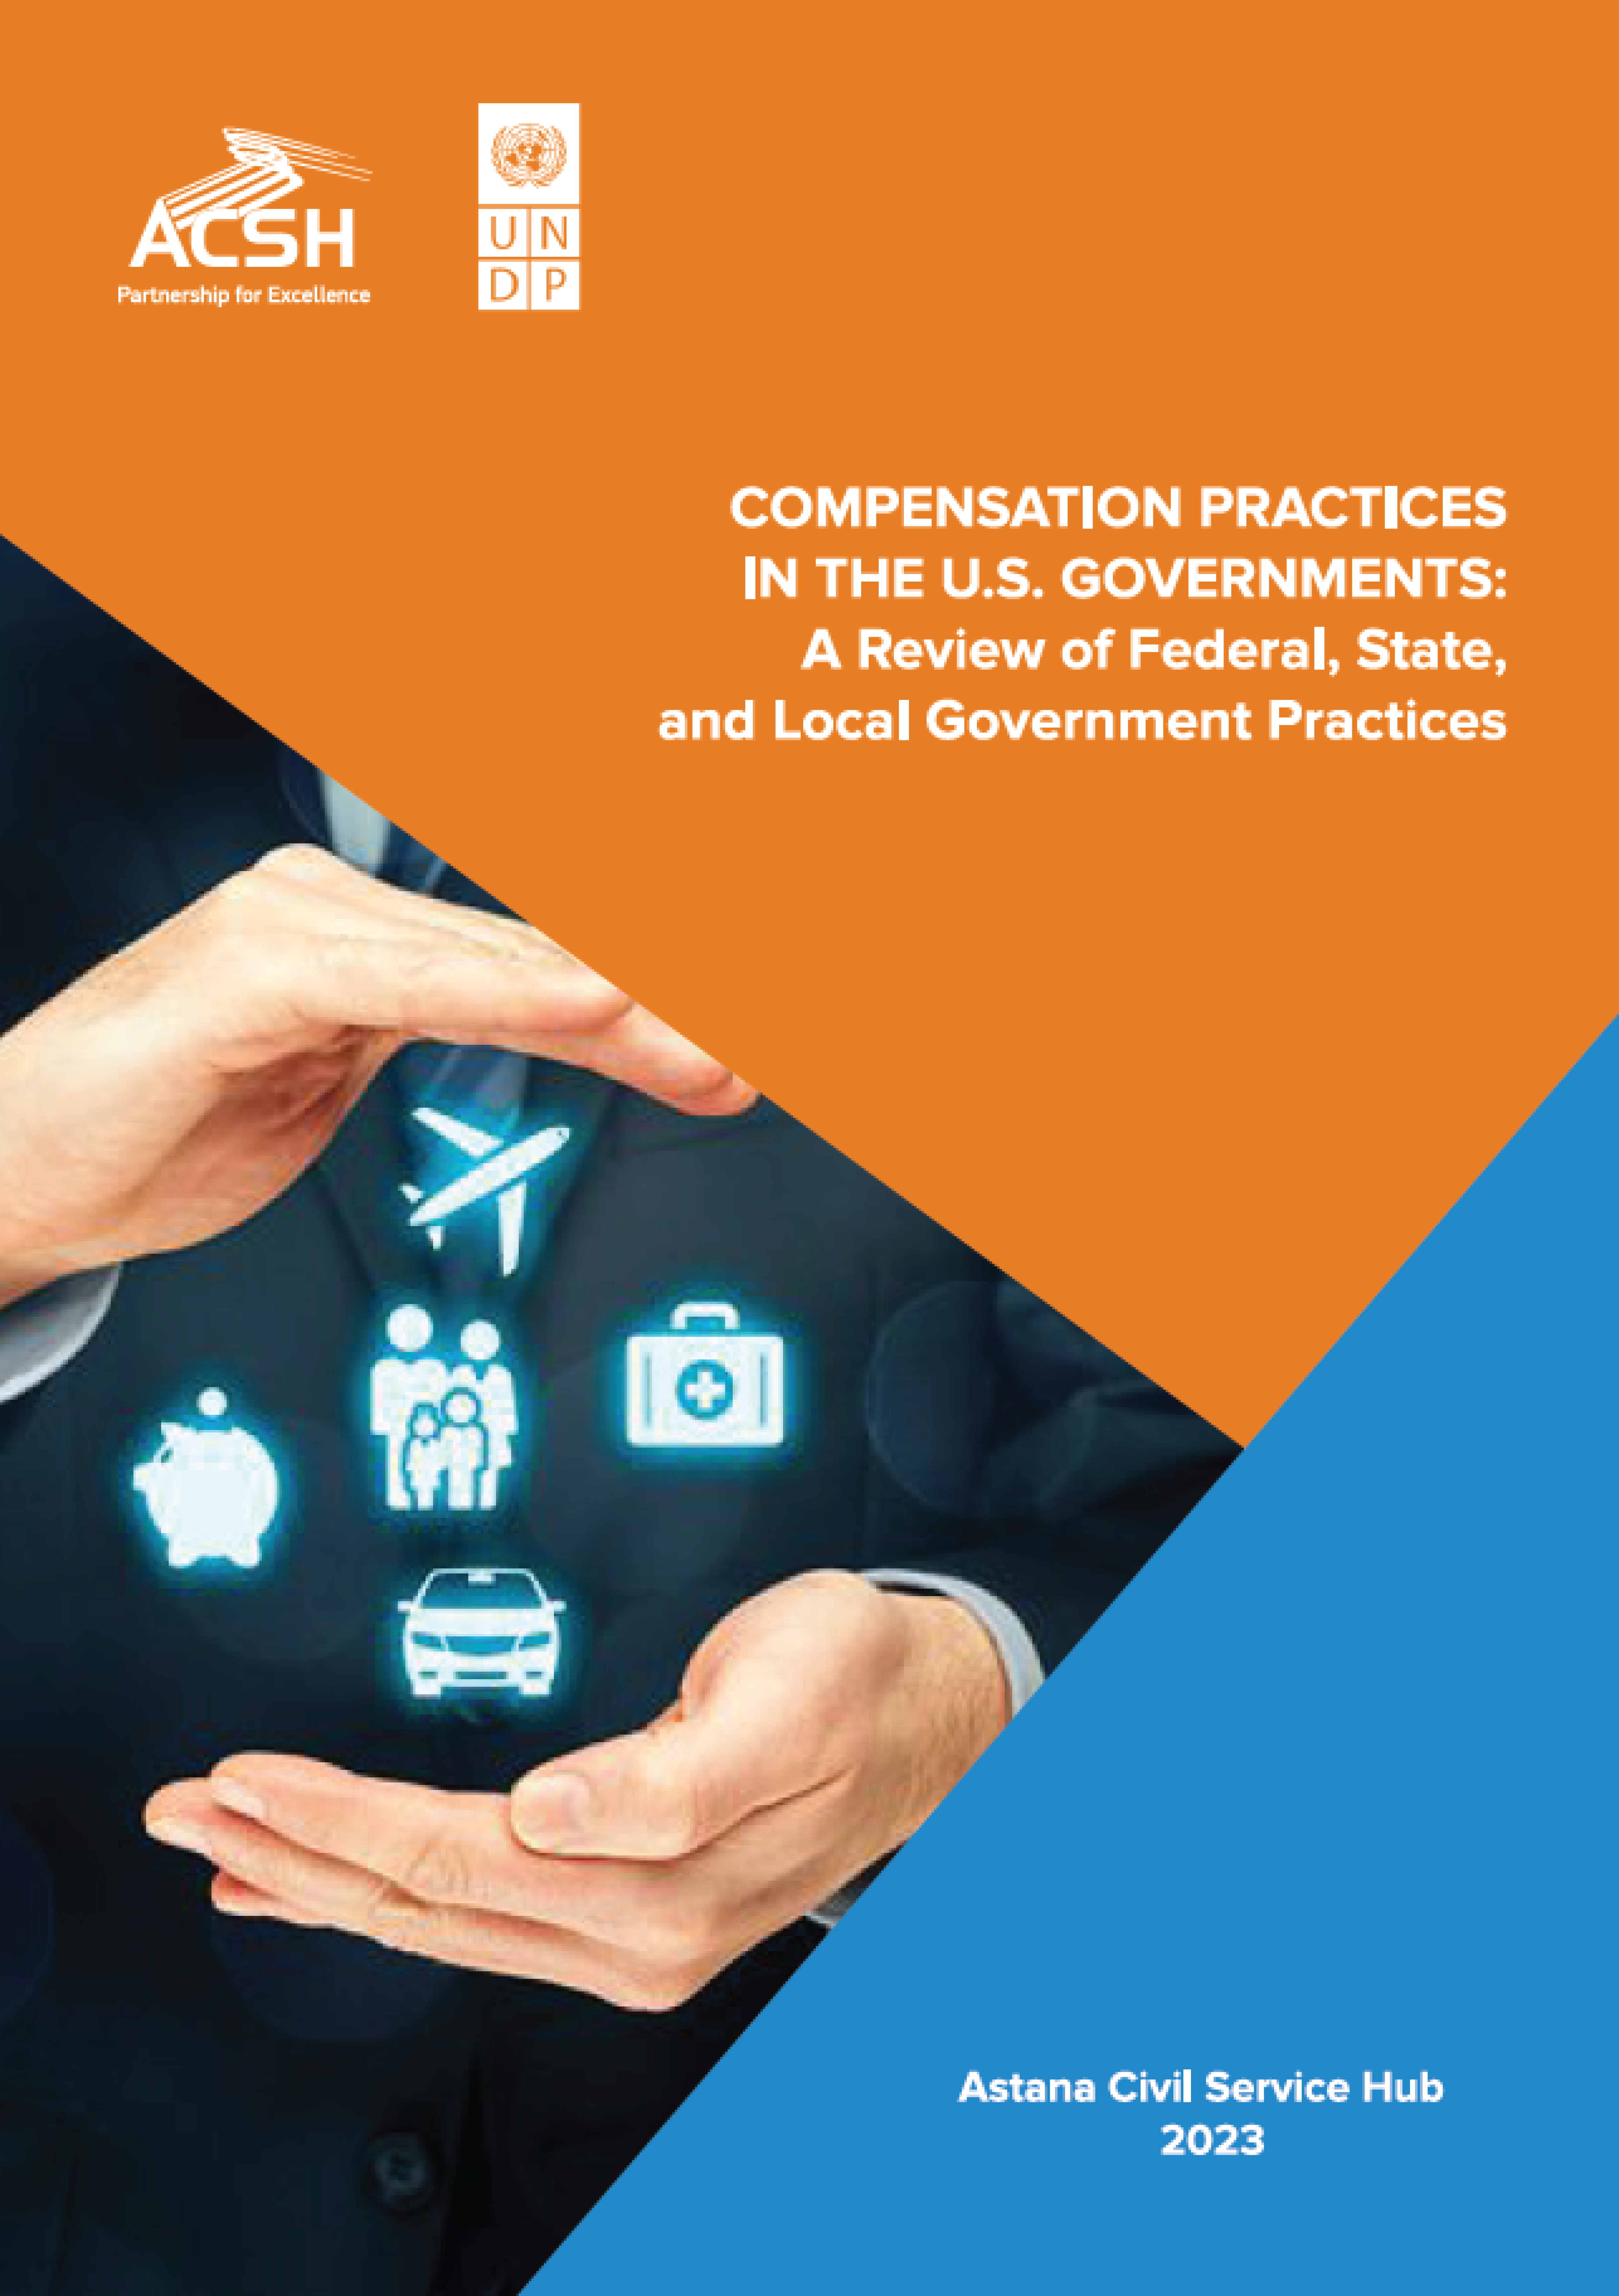 Compensation Practices in the U.S. Governments: A Review of Federal, State, and Local Government Practices